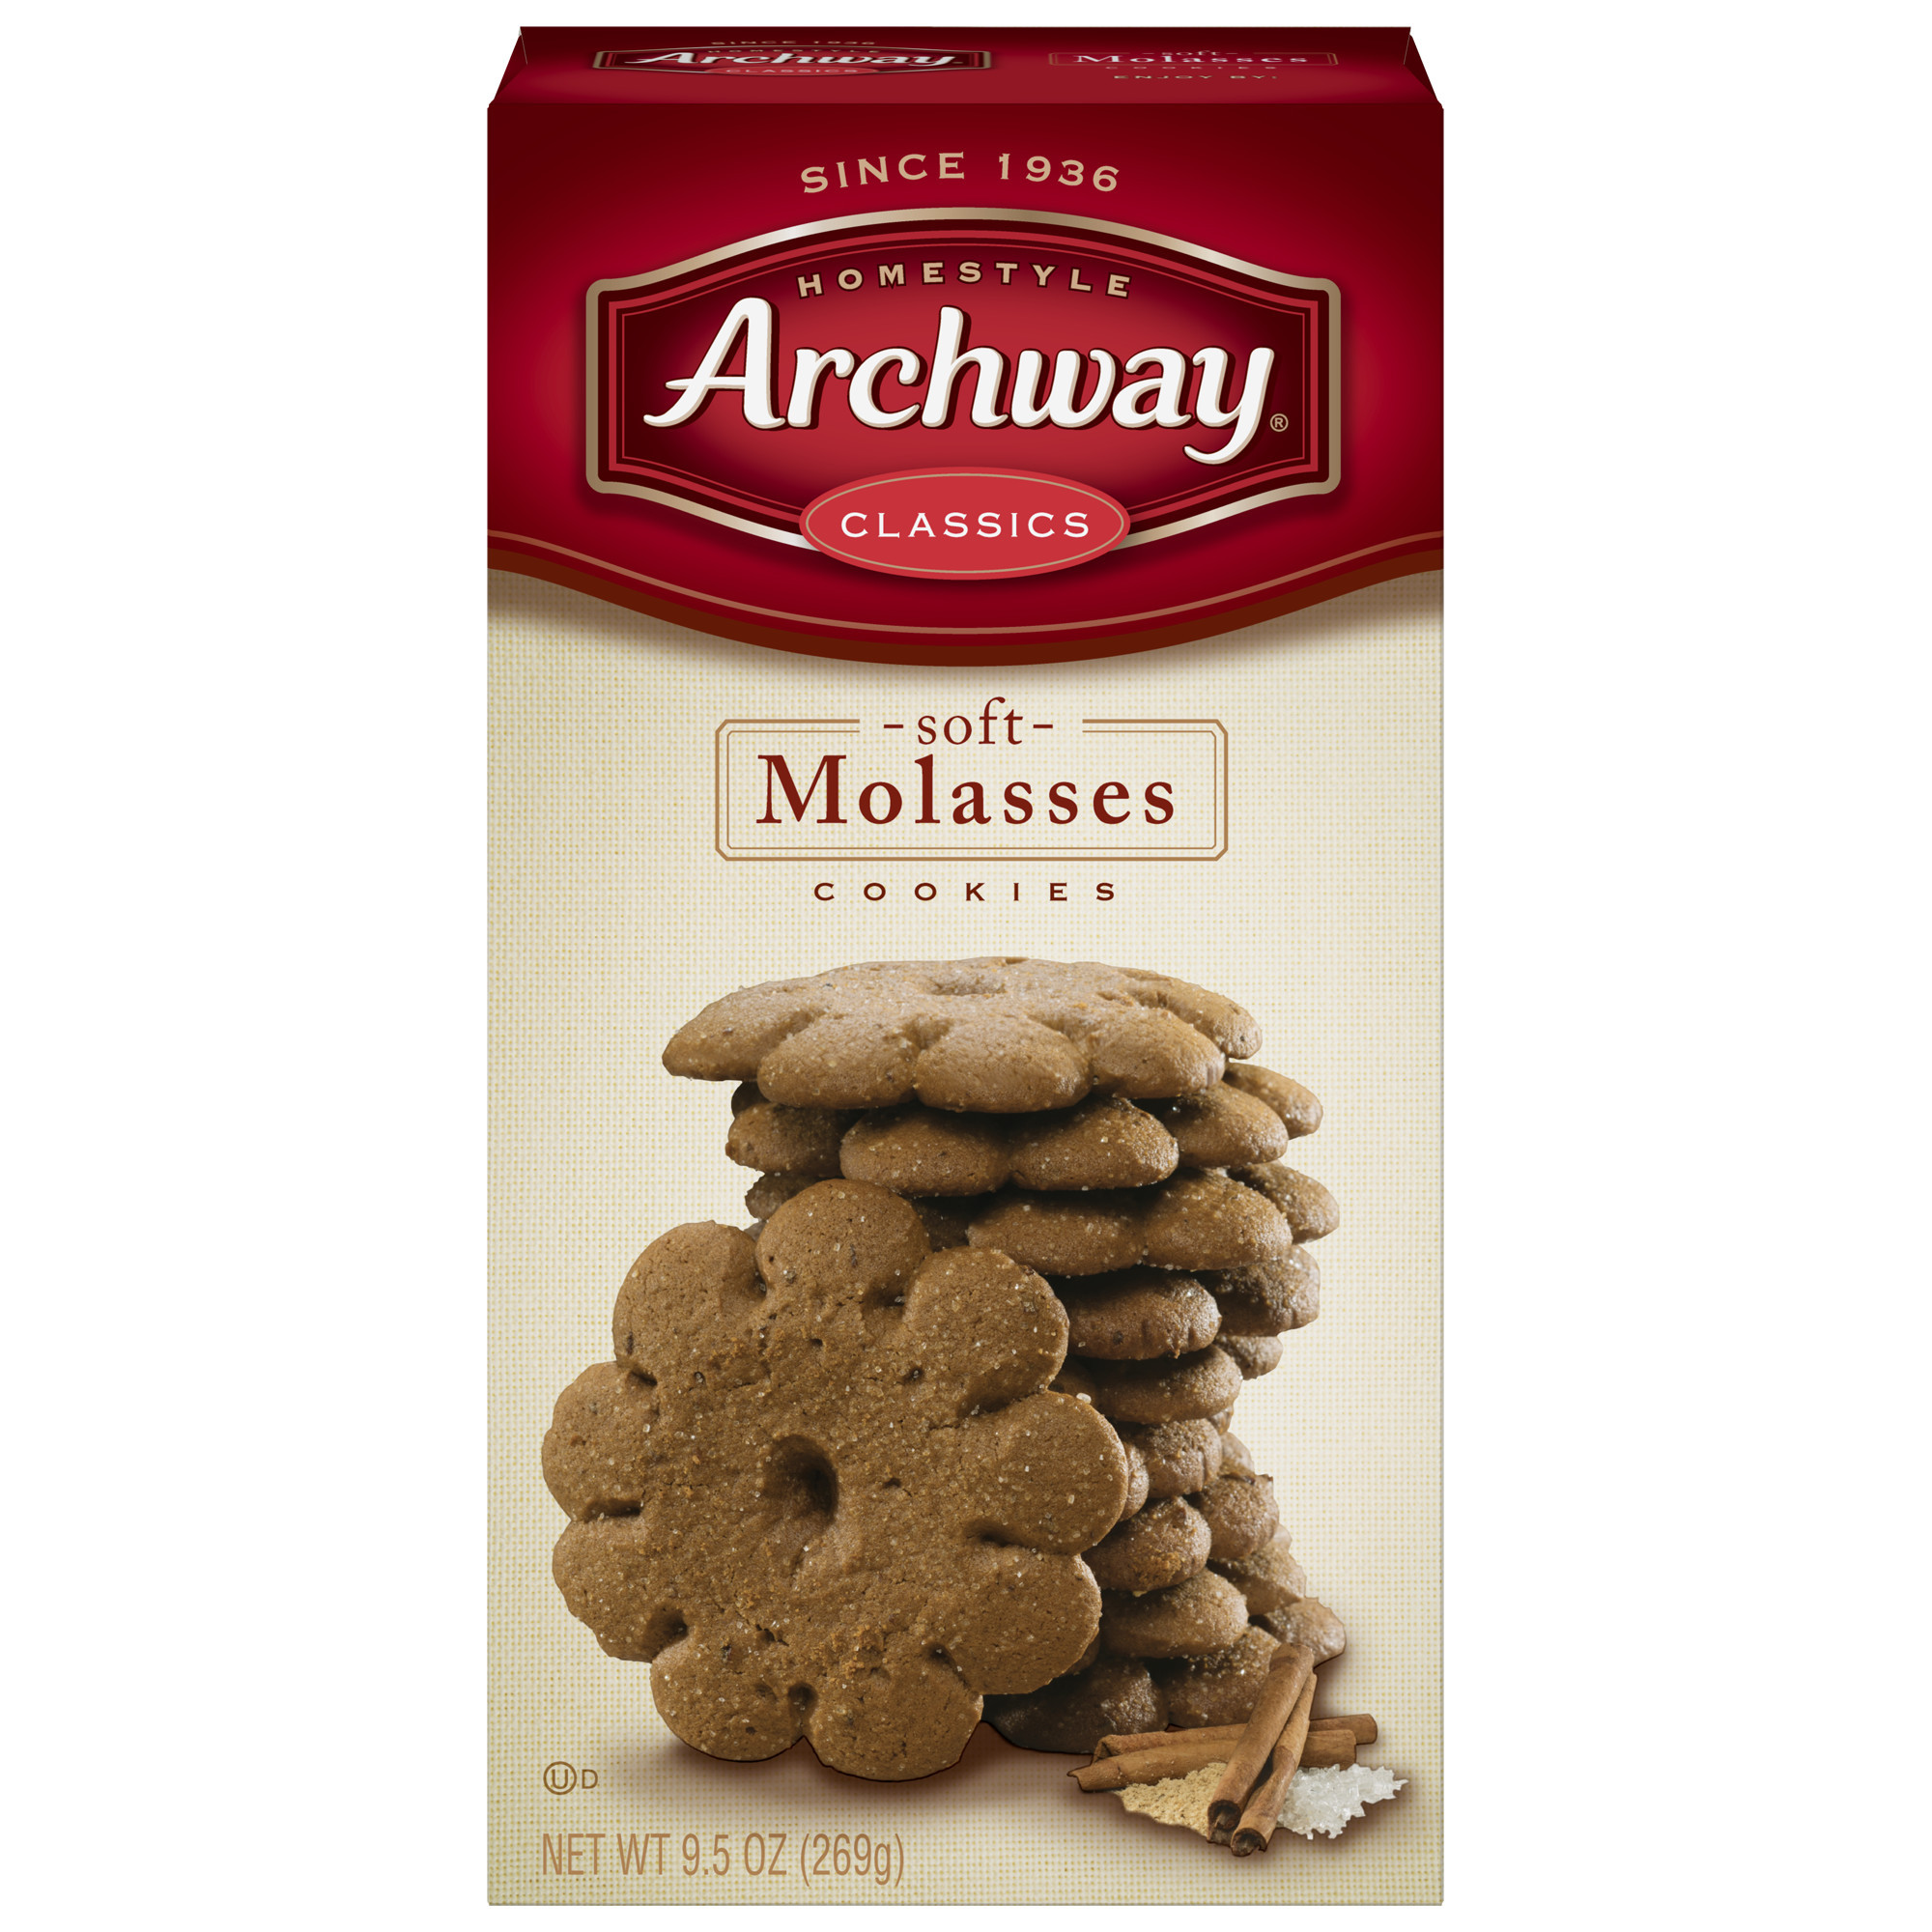 Archway Molasses Cookies
 Archway Molasses Classic Soft Cookies 9 5 Oz Walmart